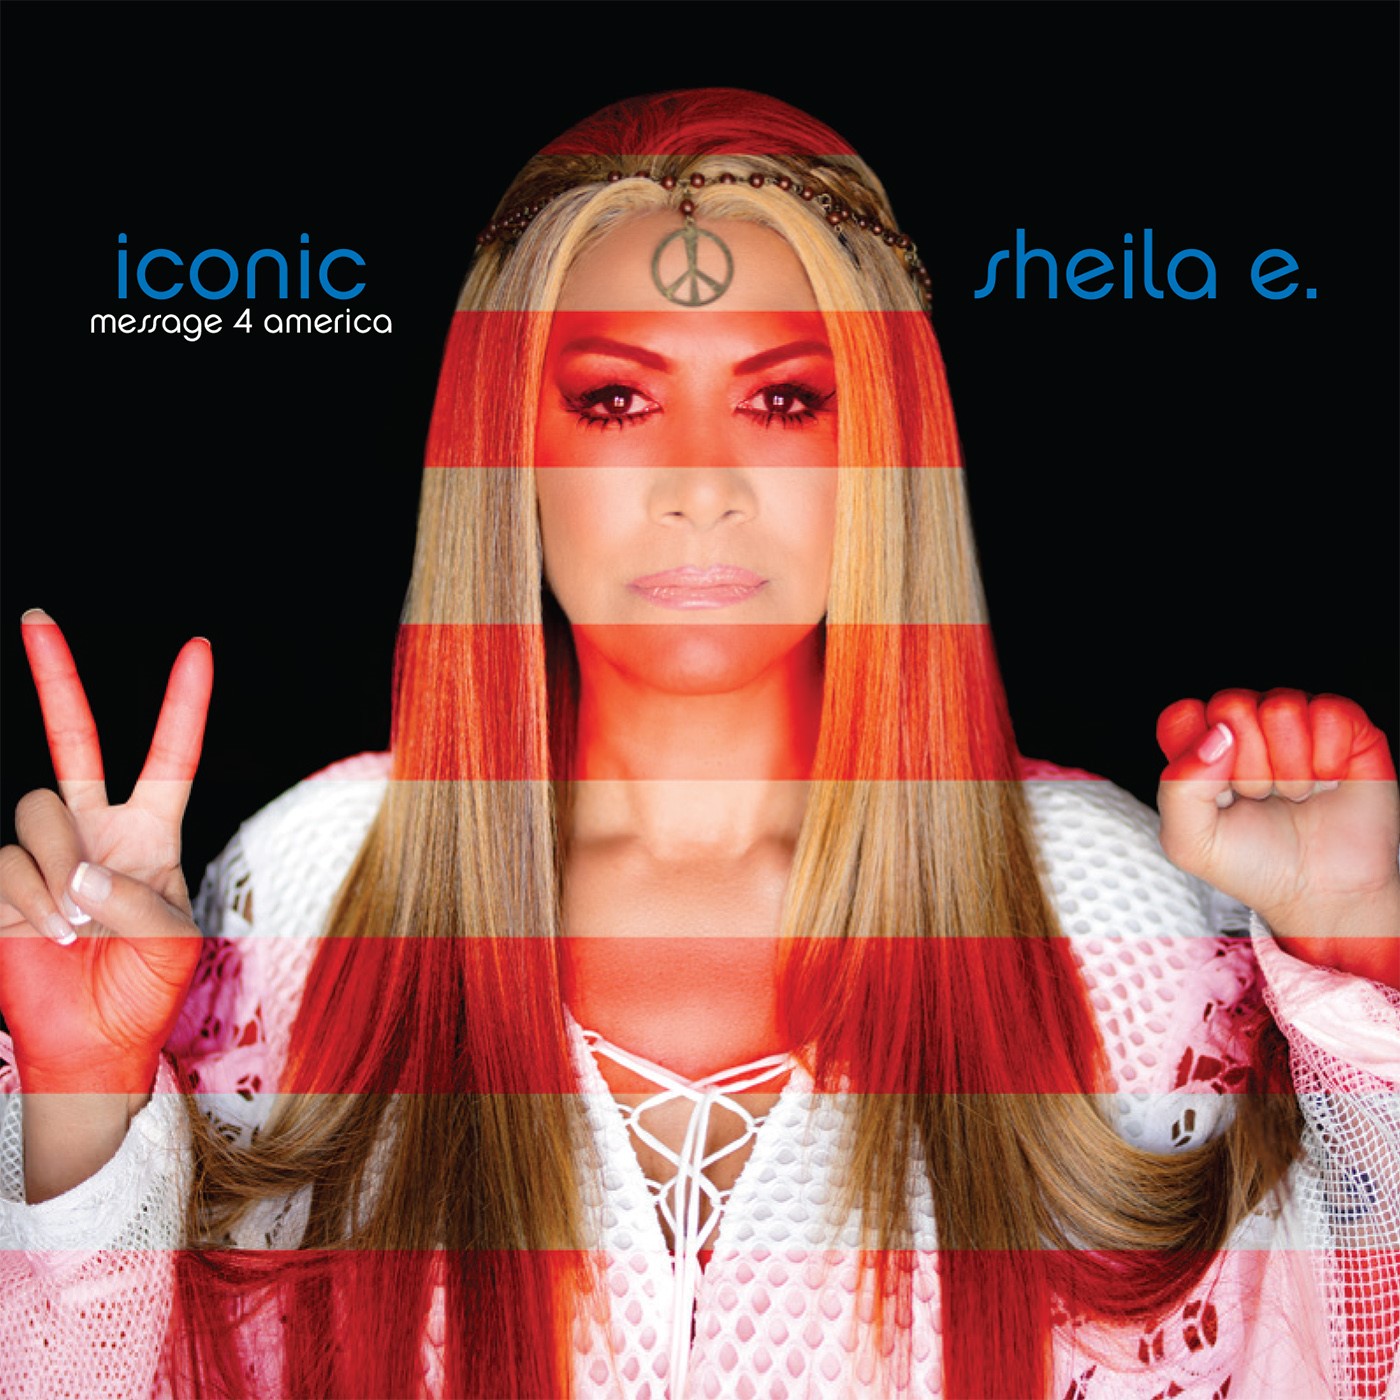 Amped™ Featured Album Of The Week Sheila E Iconic Message 4 America Amped™ Music Distribution 